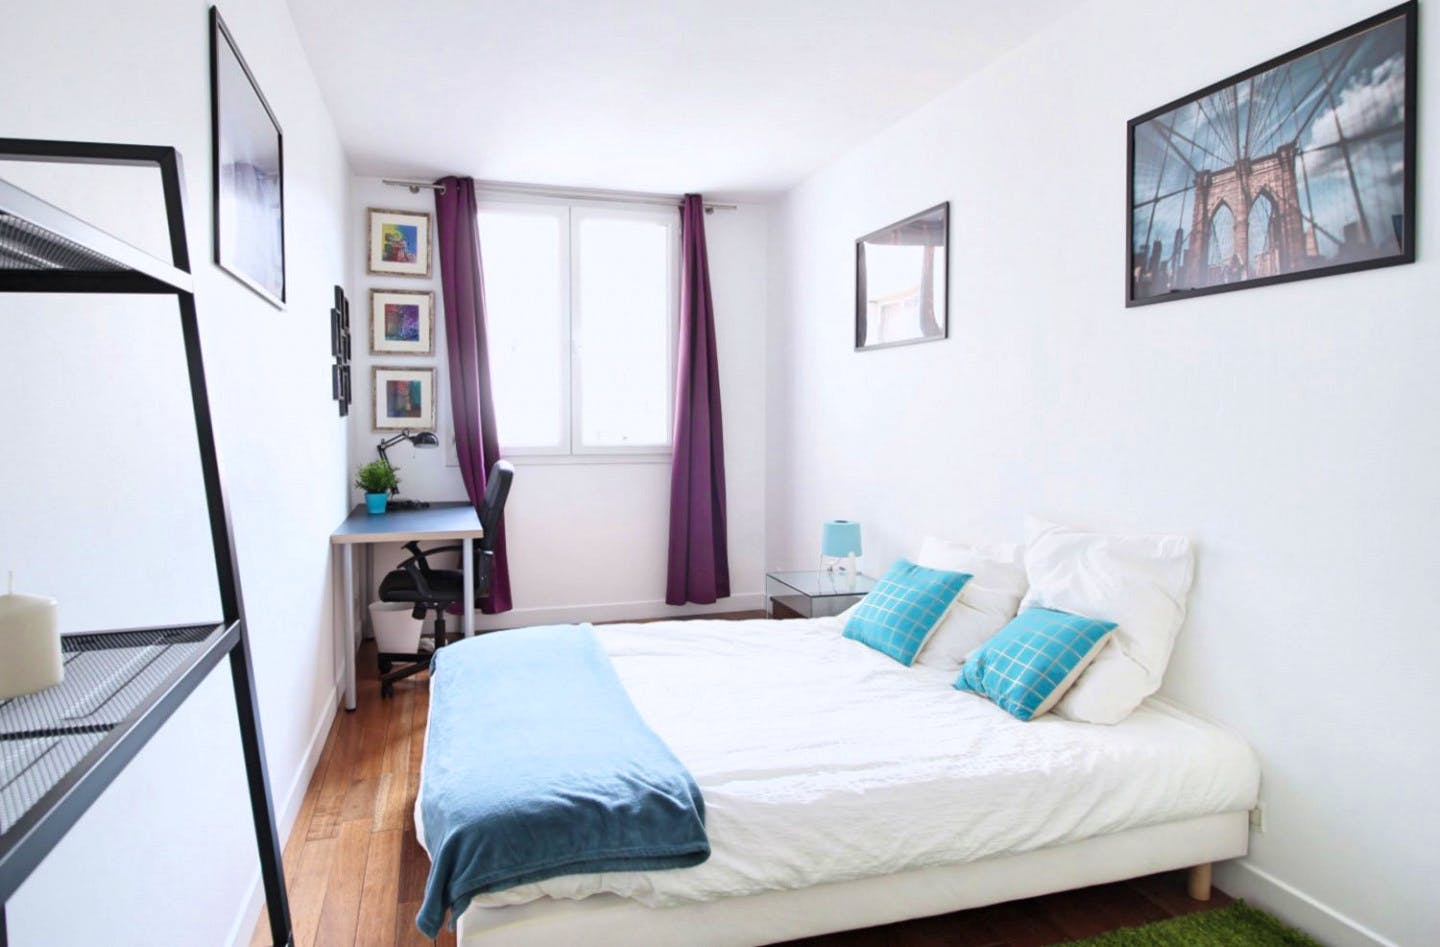 Bright and well appointed apartment located near the Sacré Cœur